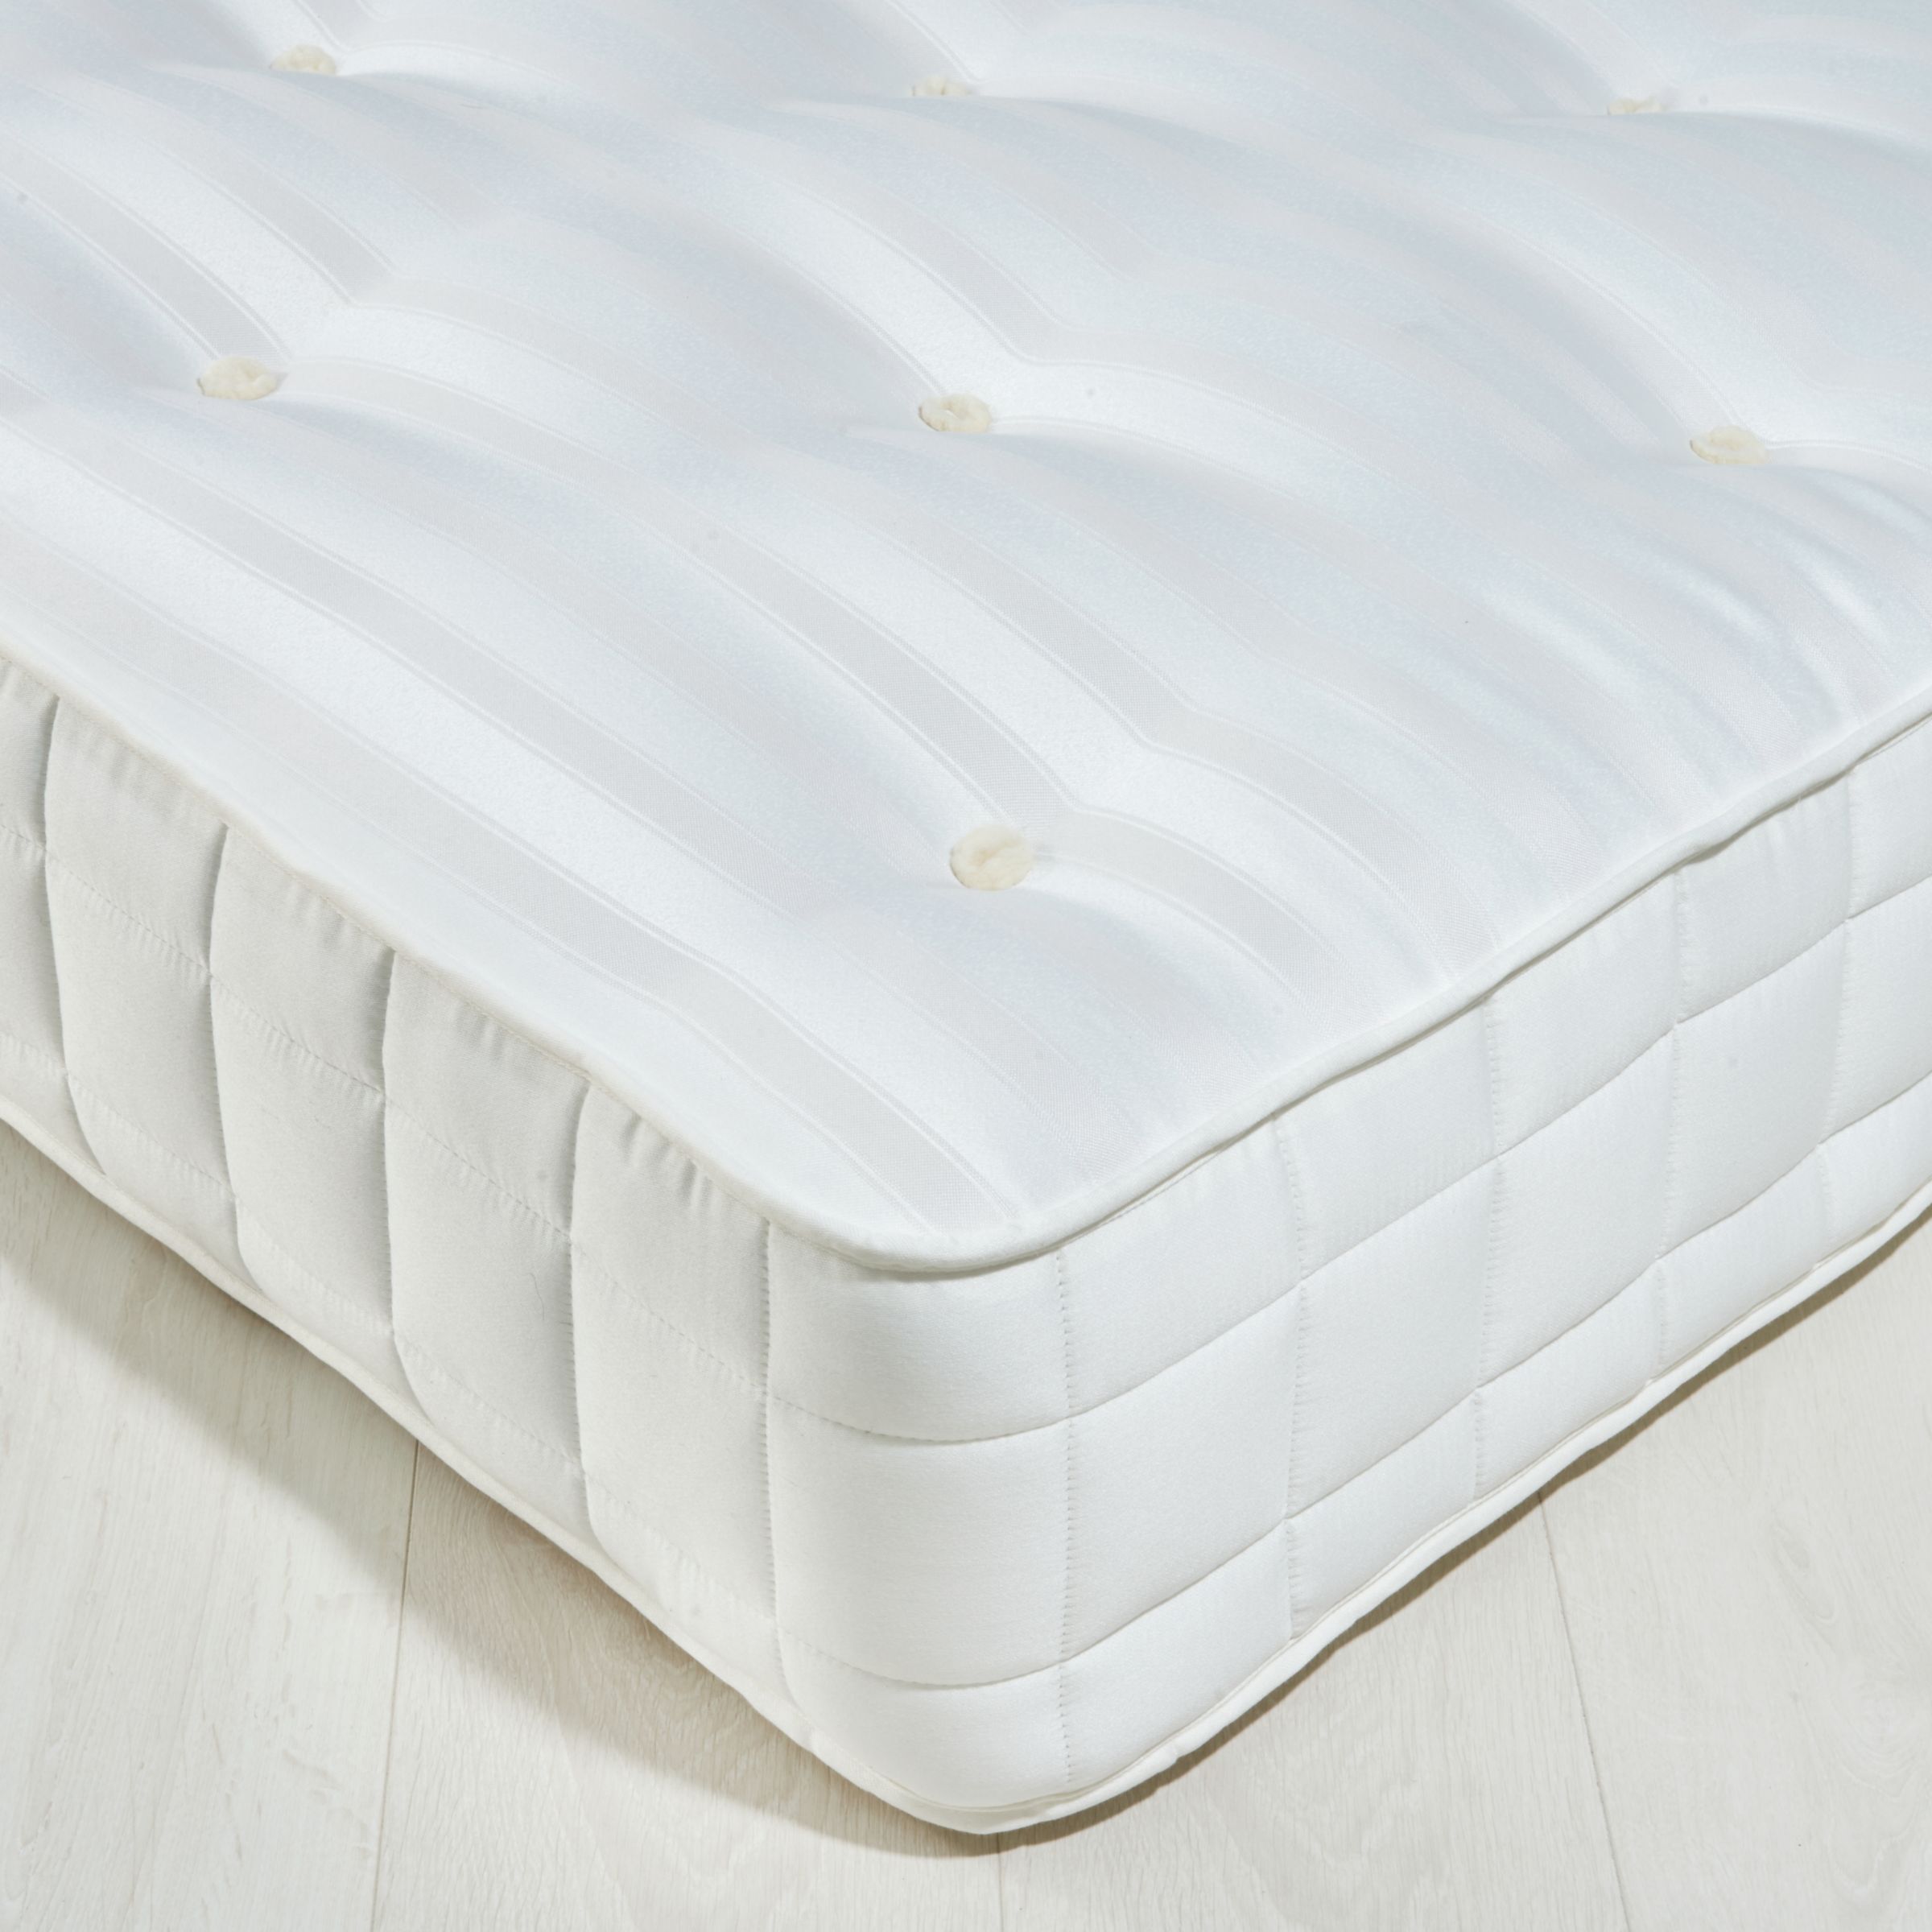 John Lewis & Partners Special Ortho Absolute 1600 Pocket Spring Mattress, Firm, Super King Size